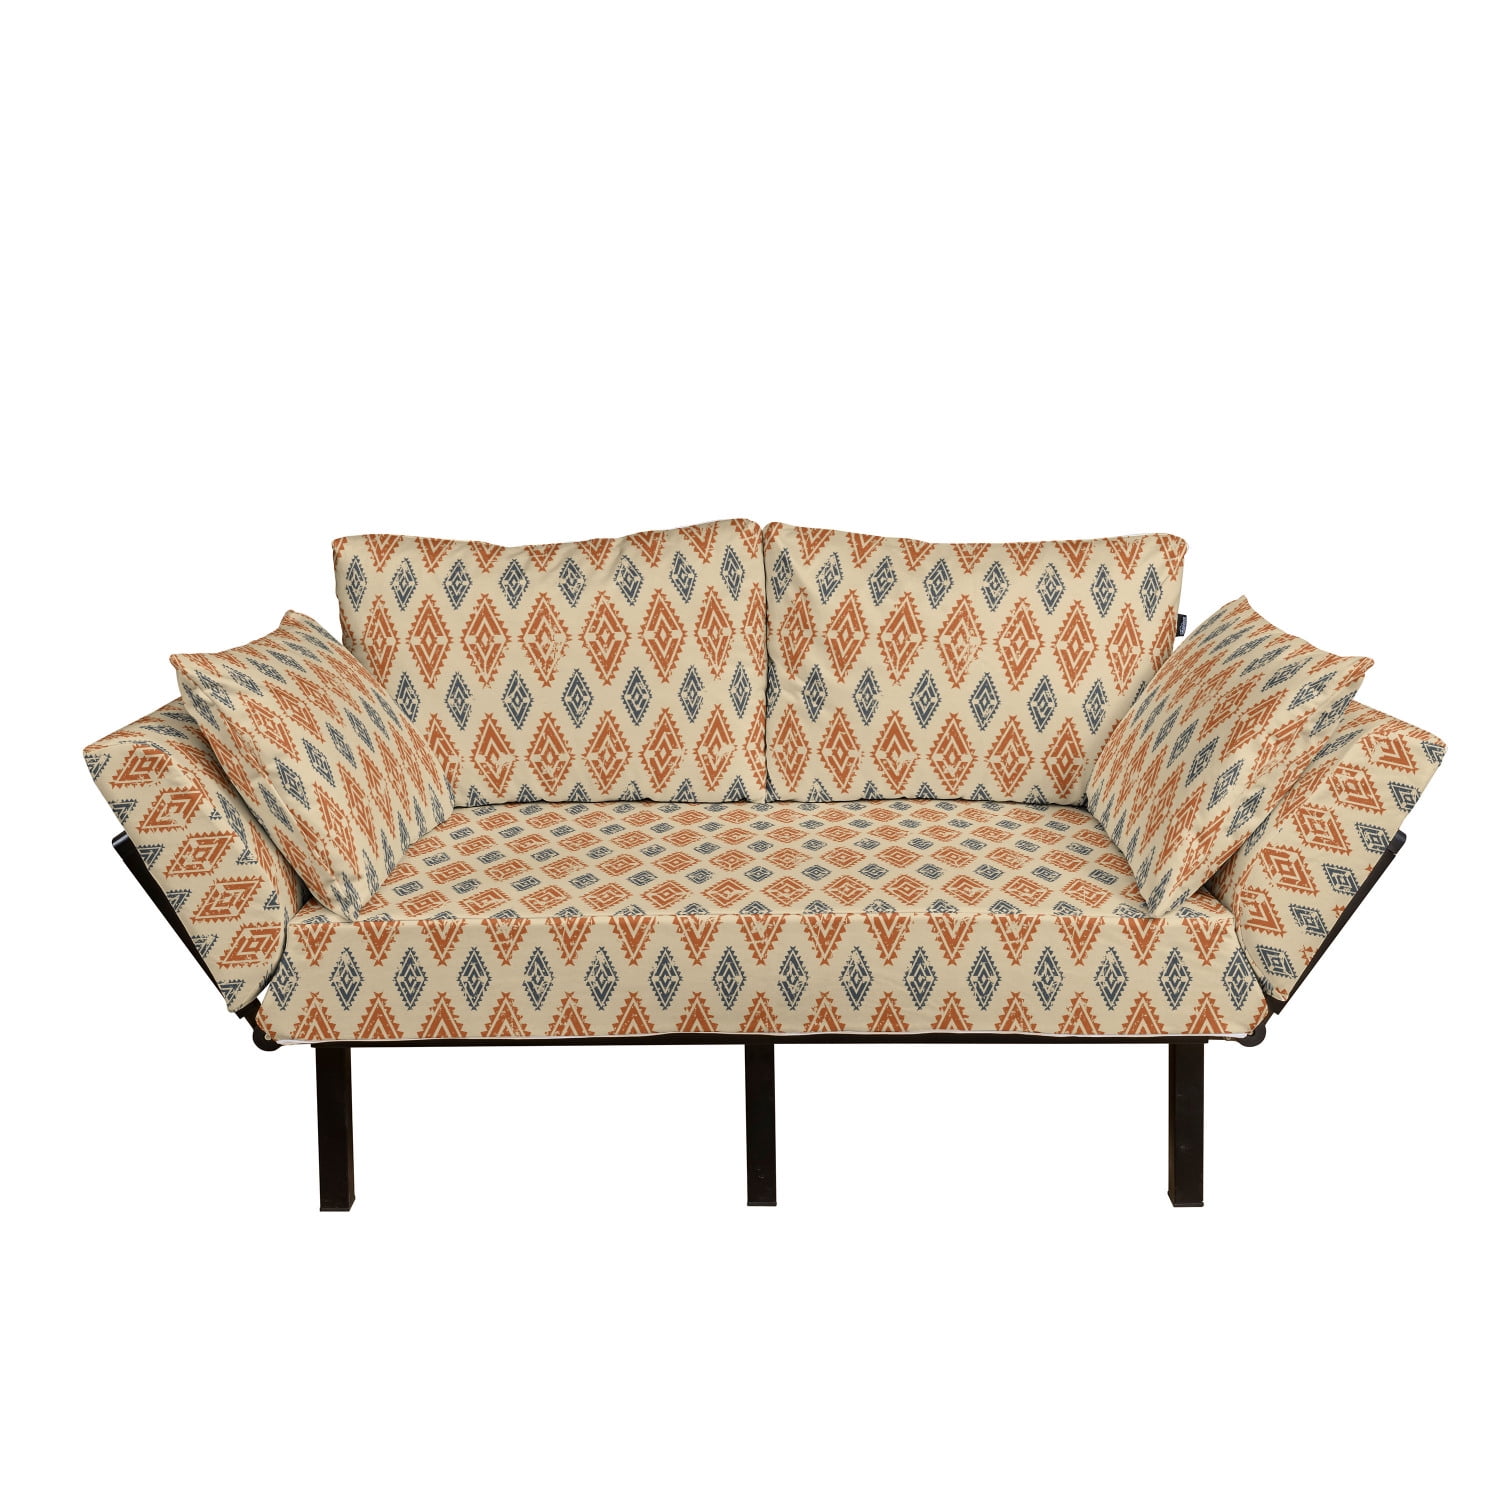 Aztec Culture Geometric Traditional Abstract Folk Triangles Pattern Daybed with Metal Frame Upholstered Sofa for Living Dorm Loveseat Mustard Vermilion and White Ambesonne Orange Futon Couch